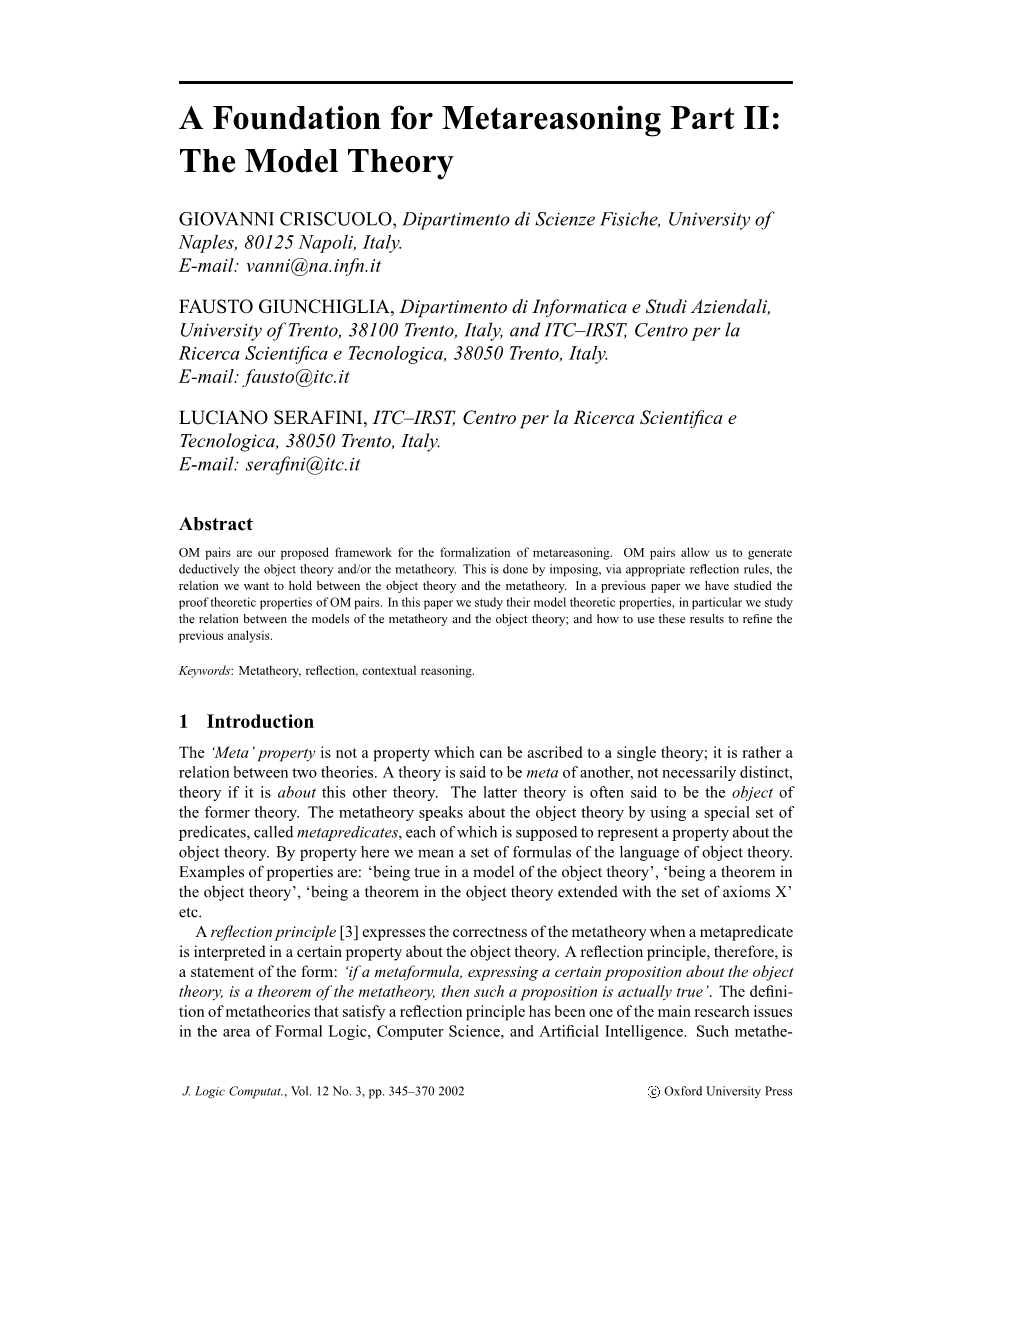 A Foundation for Metareasoning Part II: the Model Theory